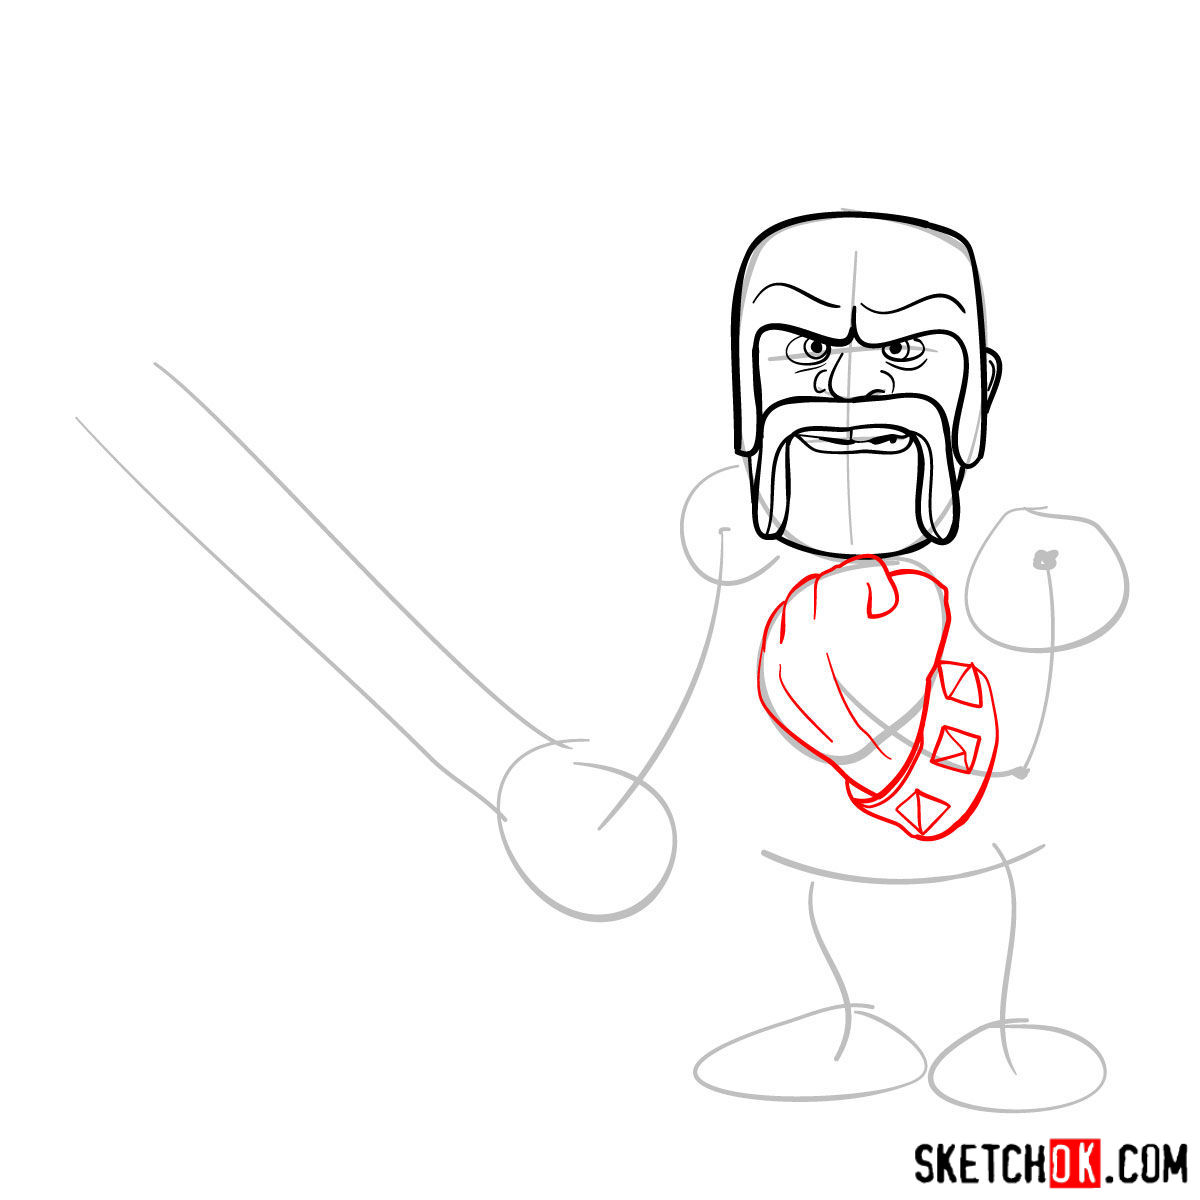 How to draw Barbarian from Clash of Clans - step 05